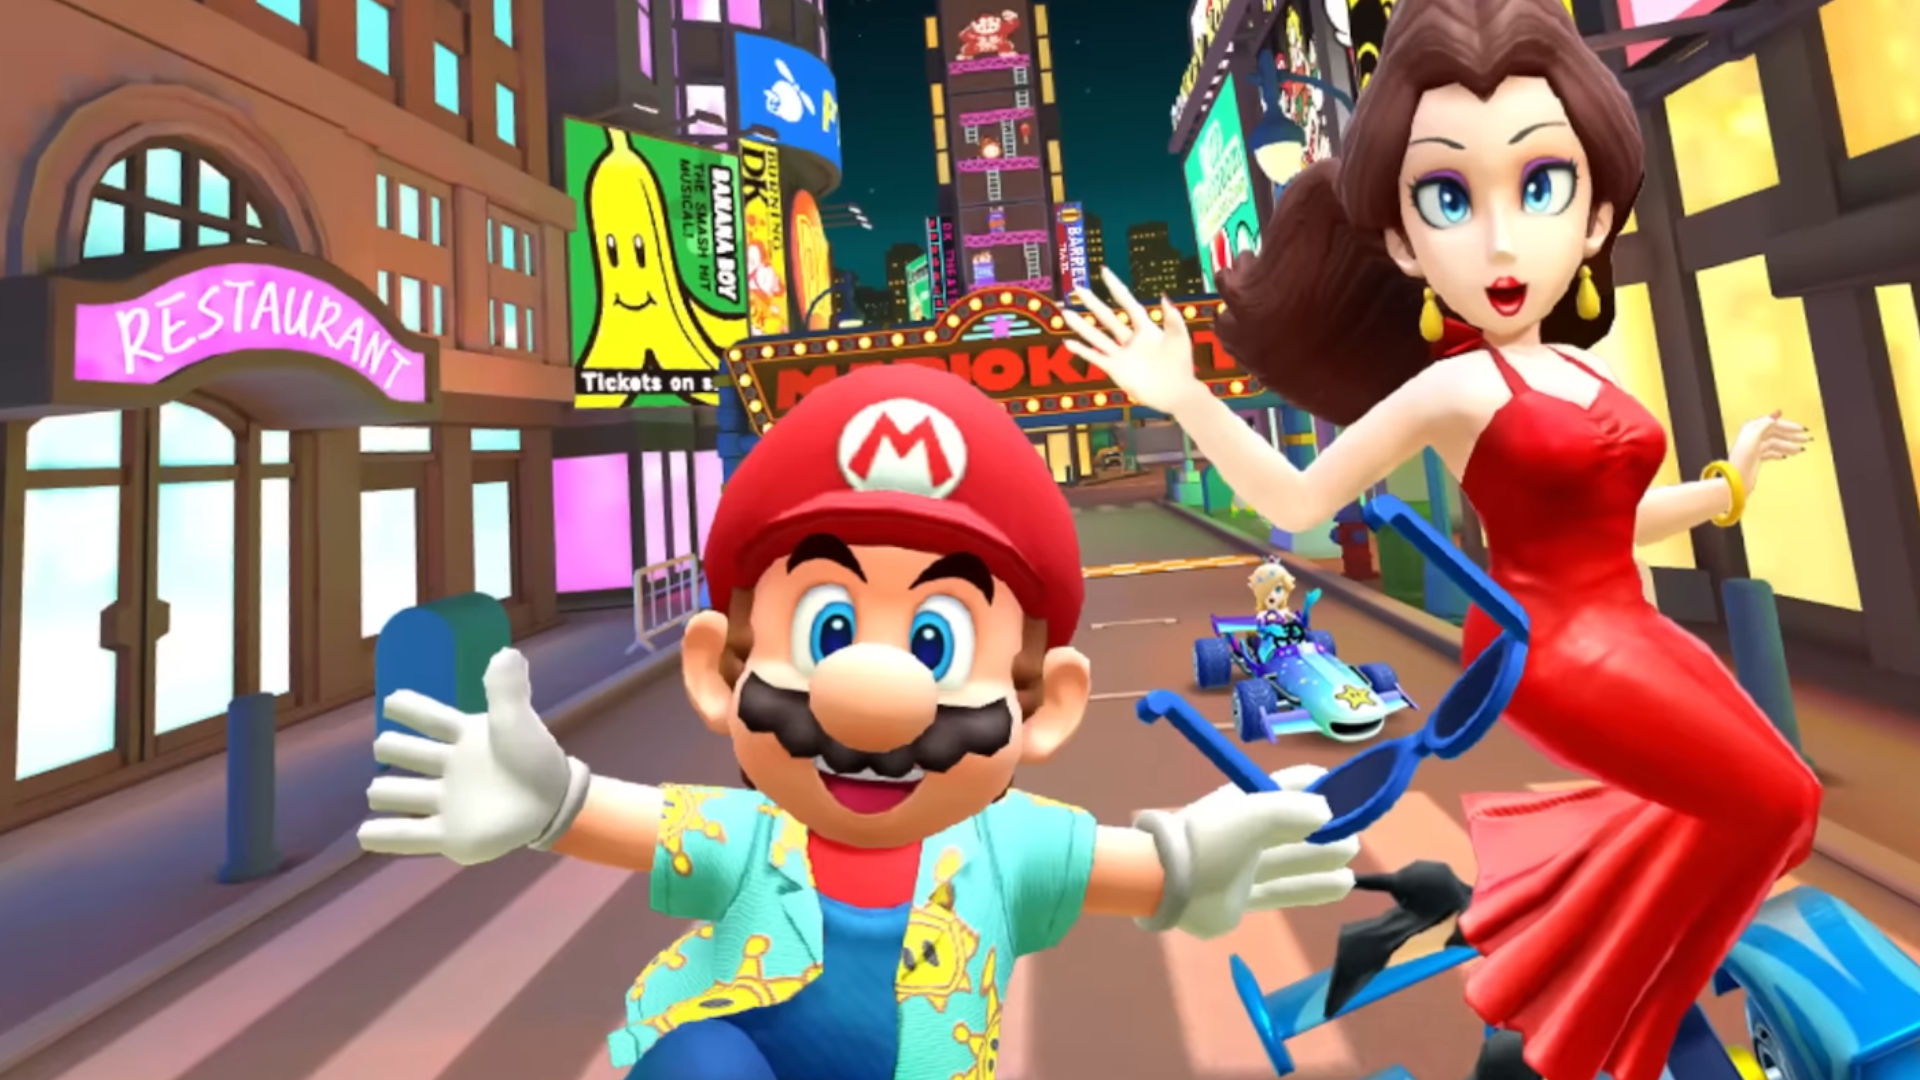 Let’s hear it for New York with the Mario Kart Tour autumn update